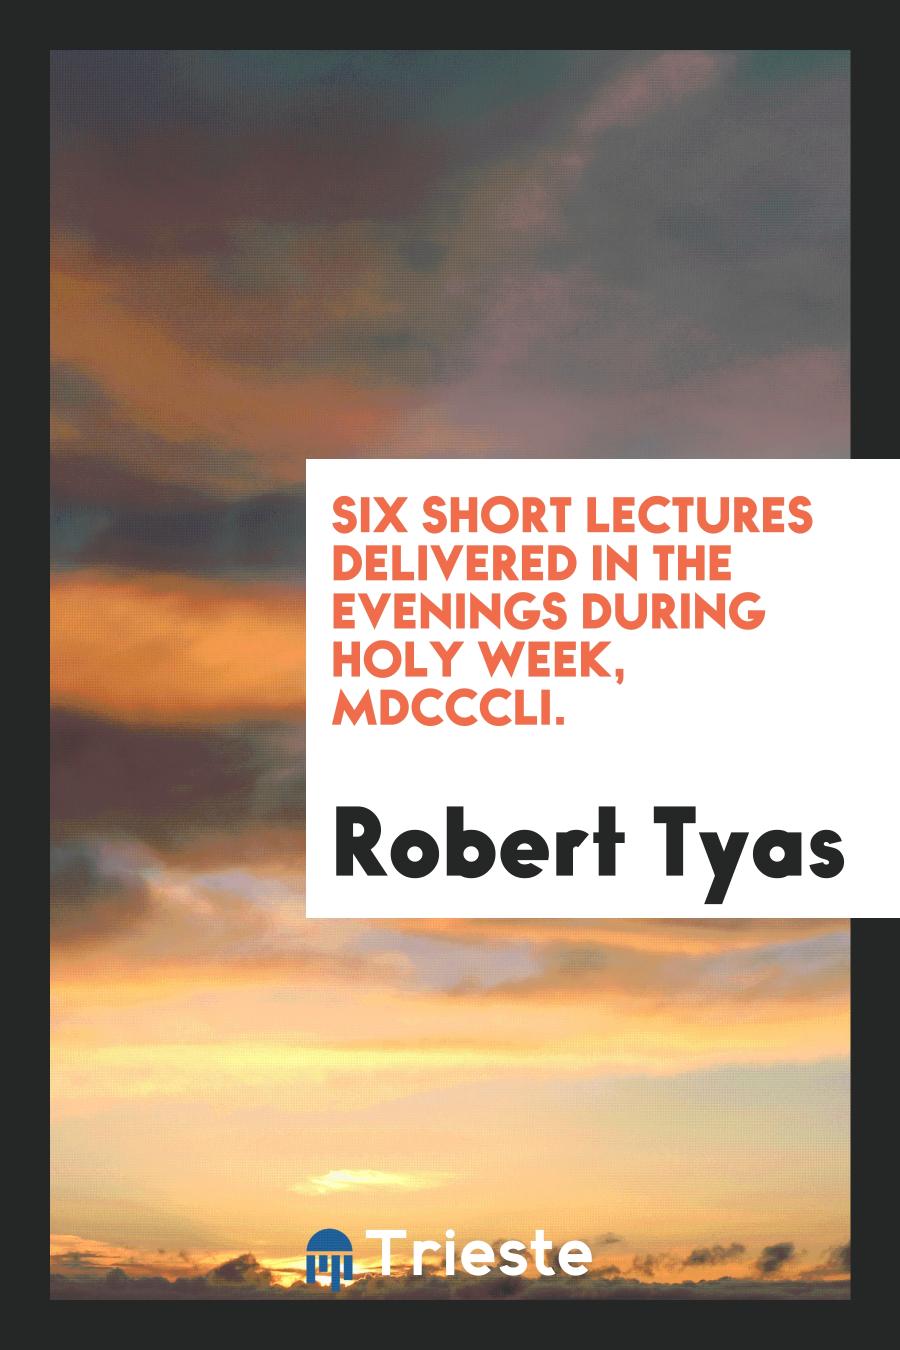 Six short lectures delivered in the evenings during Holy week, MDCCCLI.